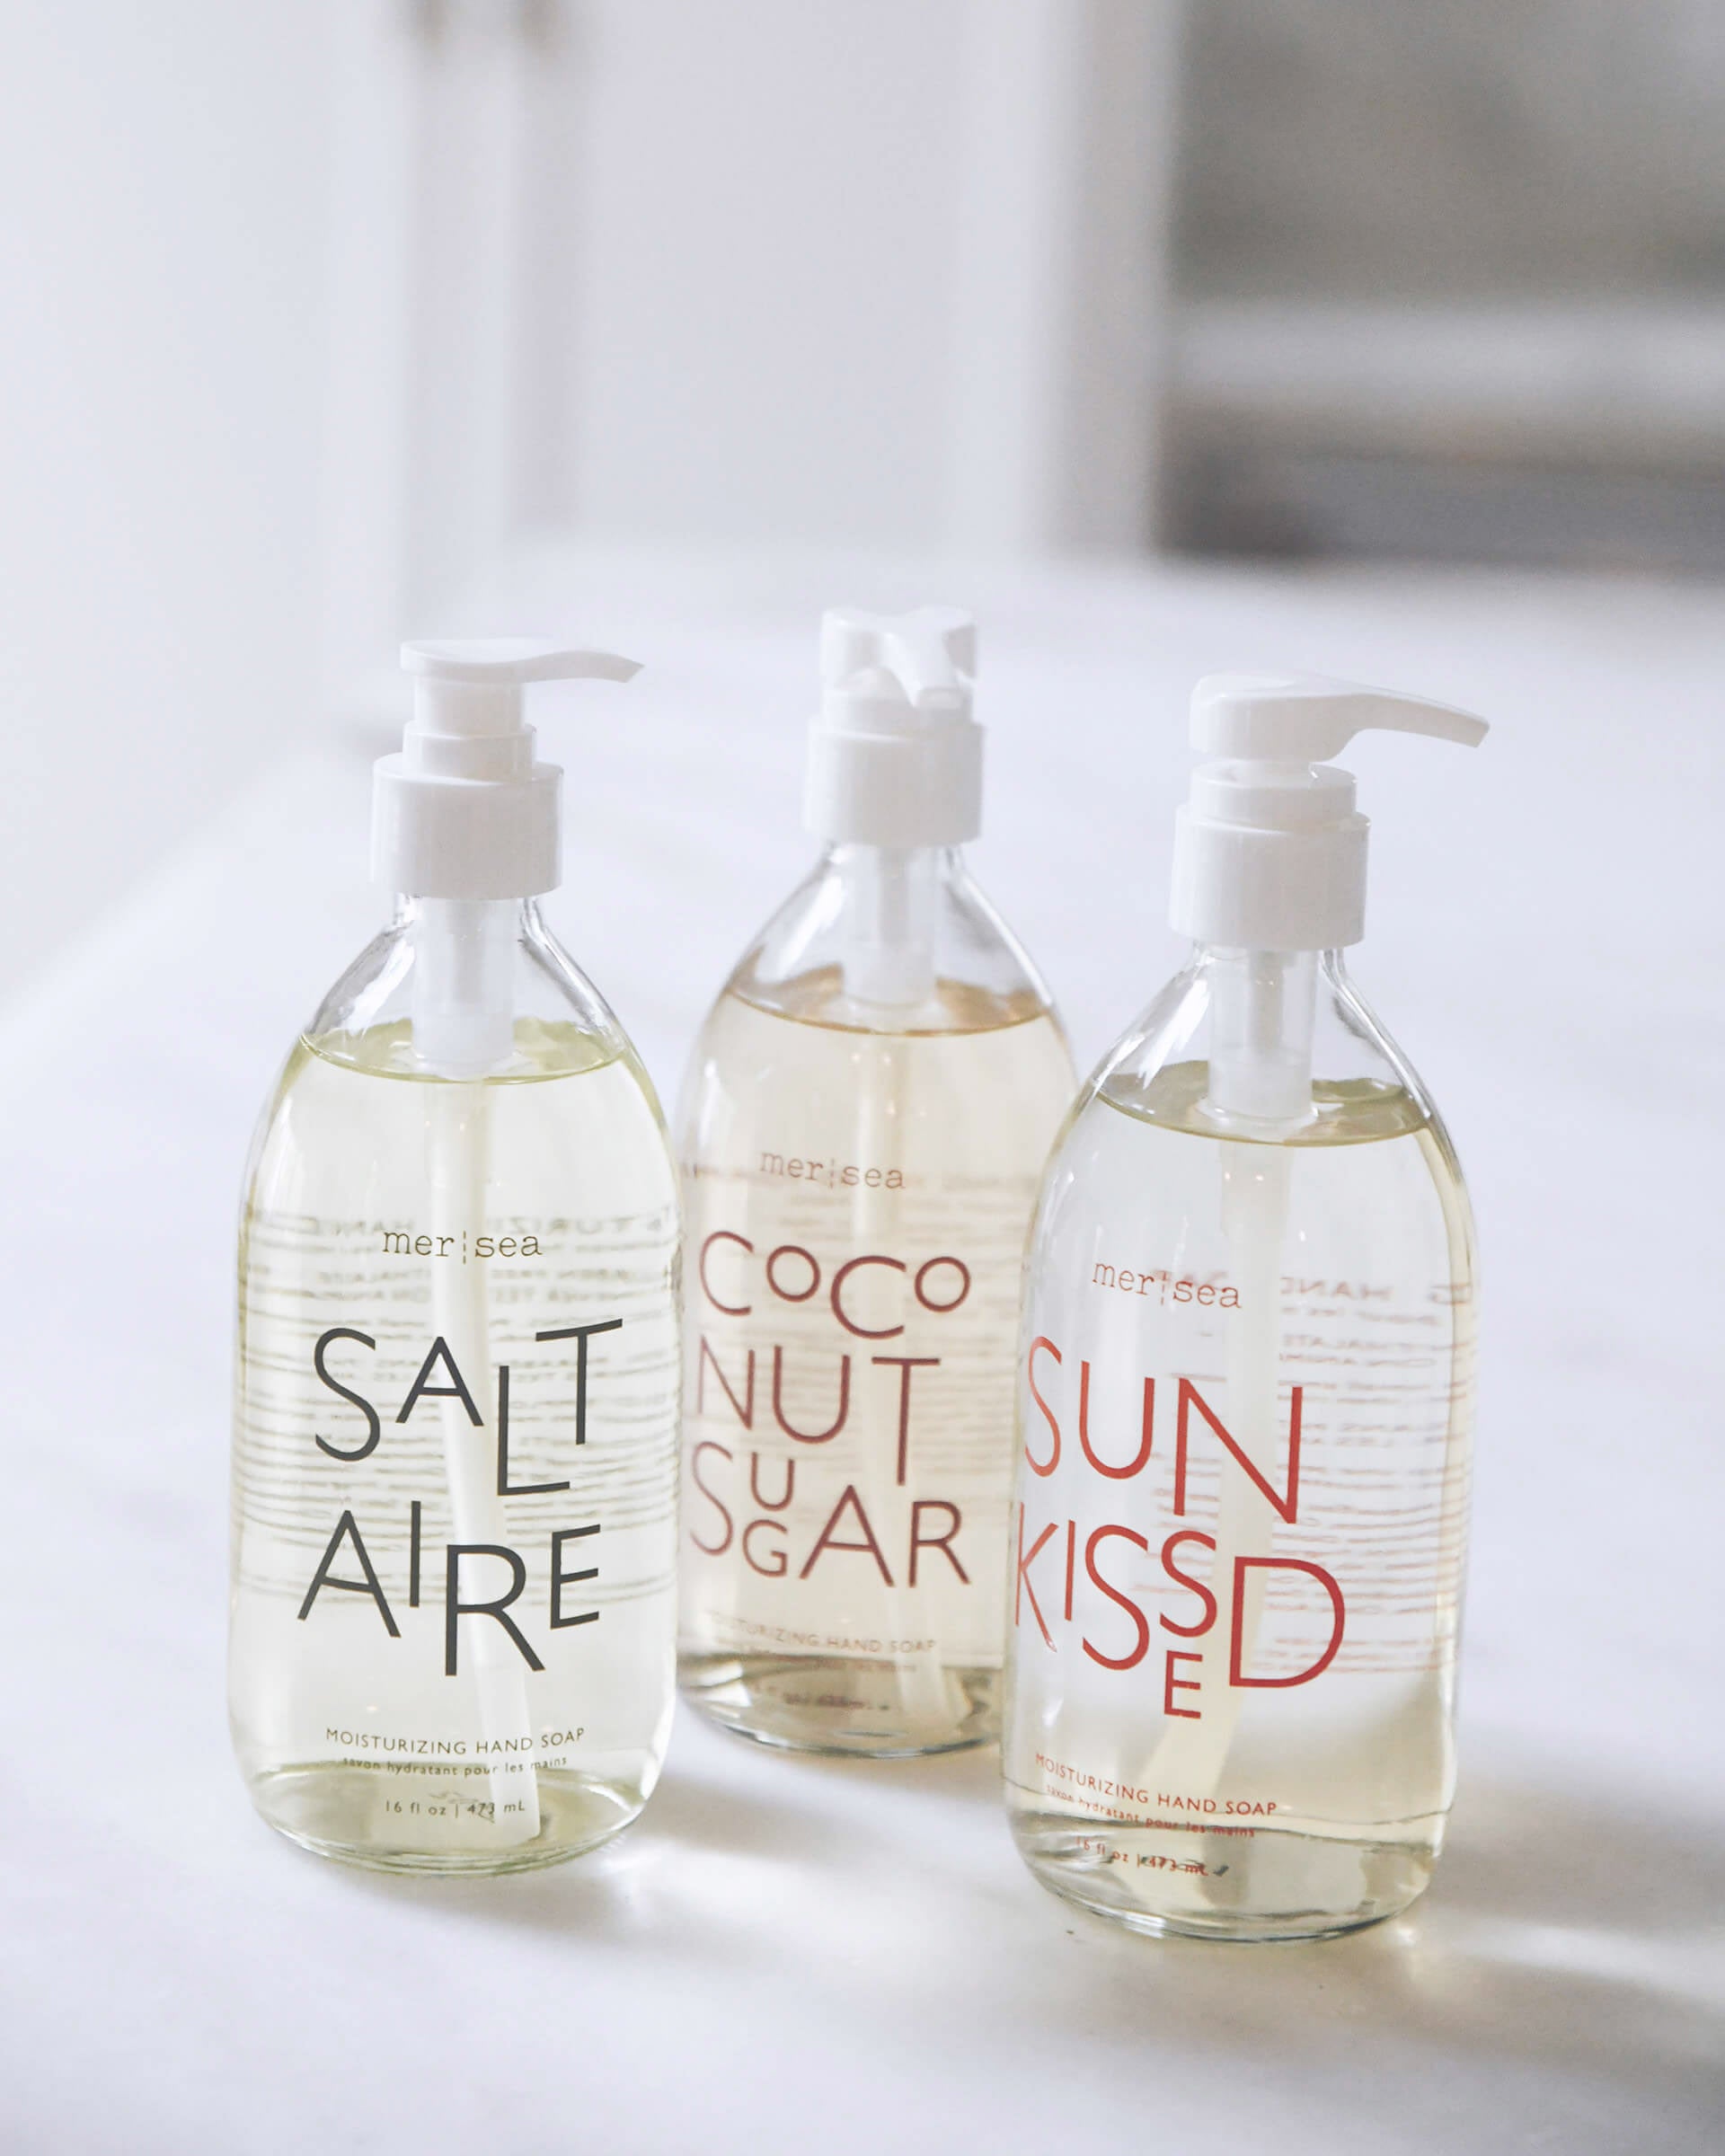 coconut sugar, saltaire, and sun kissed large liquid hand soaps sitting on a counter in a kitchen